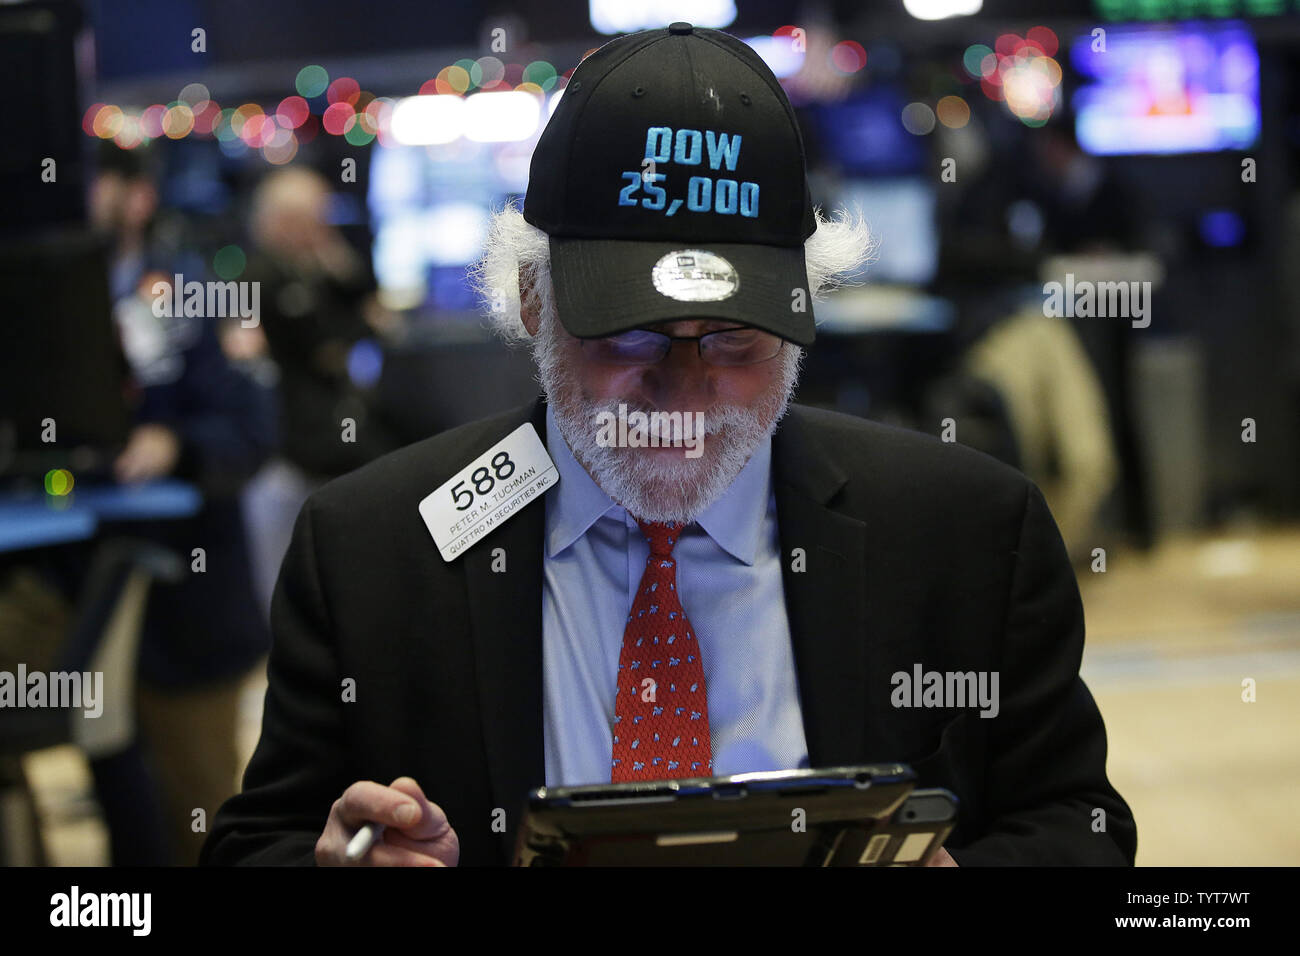 A trader wears a DOW 25,000 hat on the floor of the NYSE at the closing  bell on the day when the Dow Jones Industrial Average closes above the  25,000 mark for